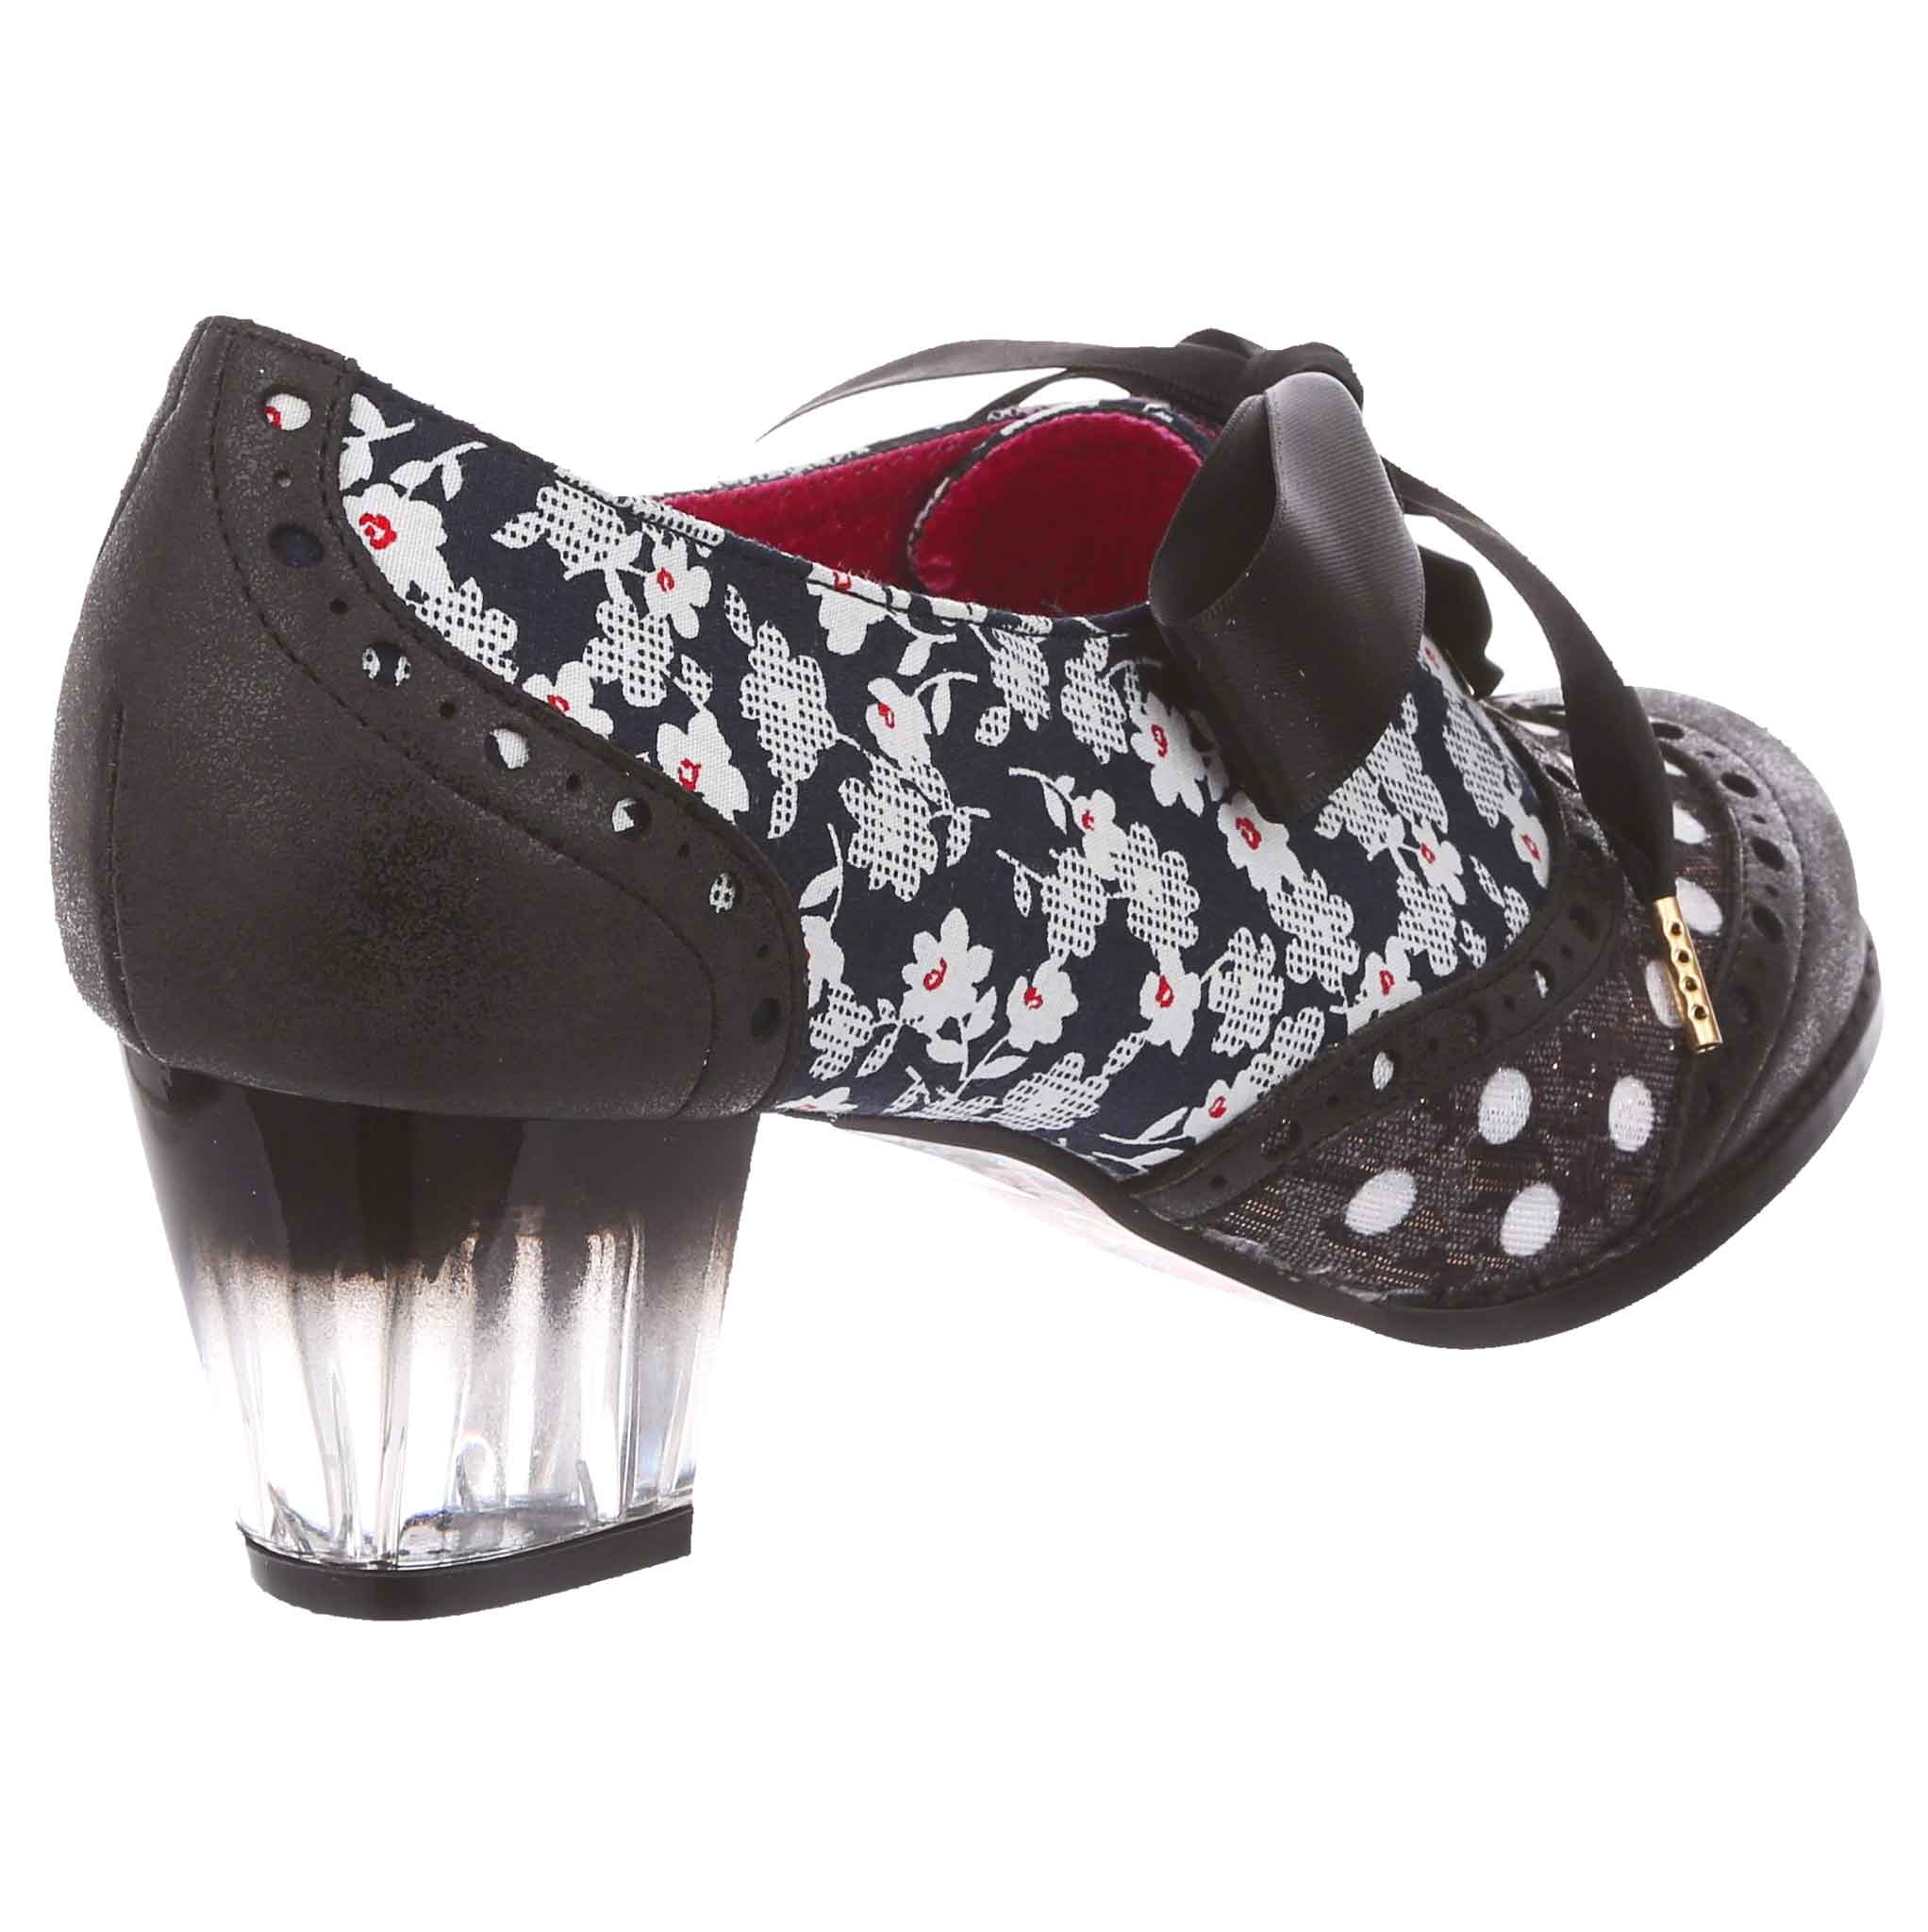 Mid Heel Glitter Shoes X Poetic Licence By Irregular Choice 'Corporate Beauty' 